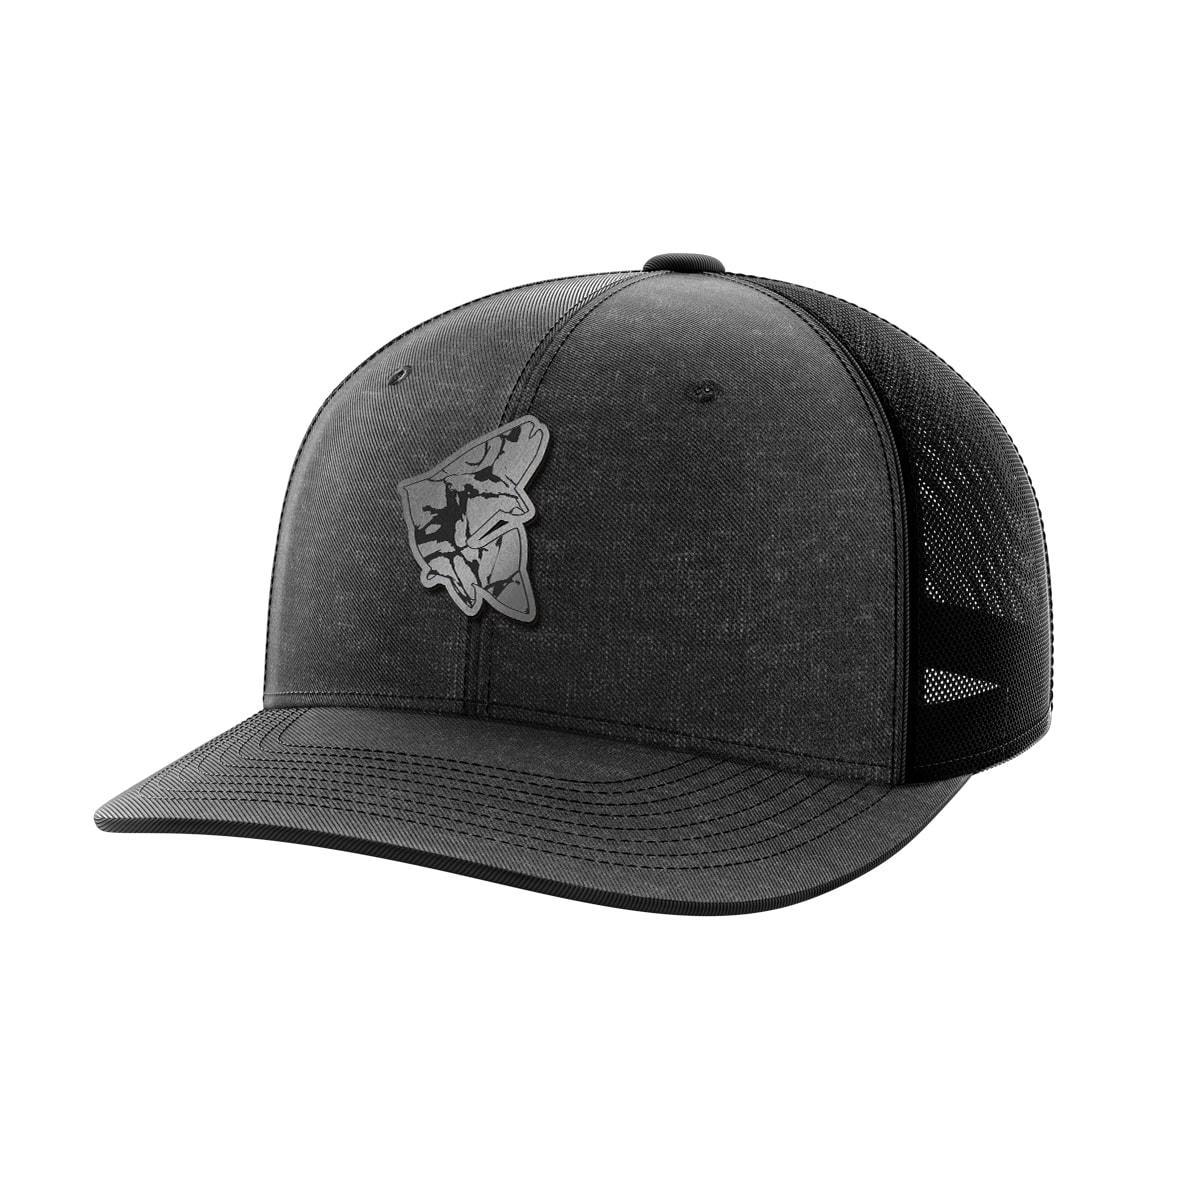 Fish Black Patch Hat - Greater Half